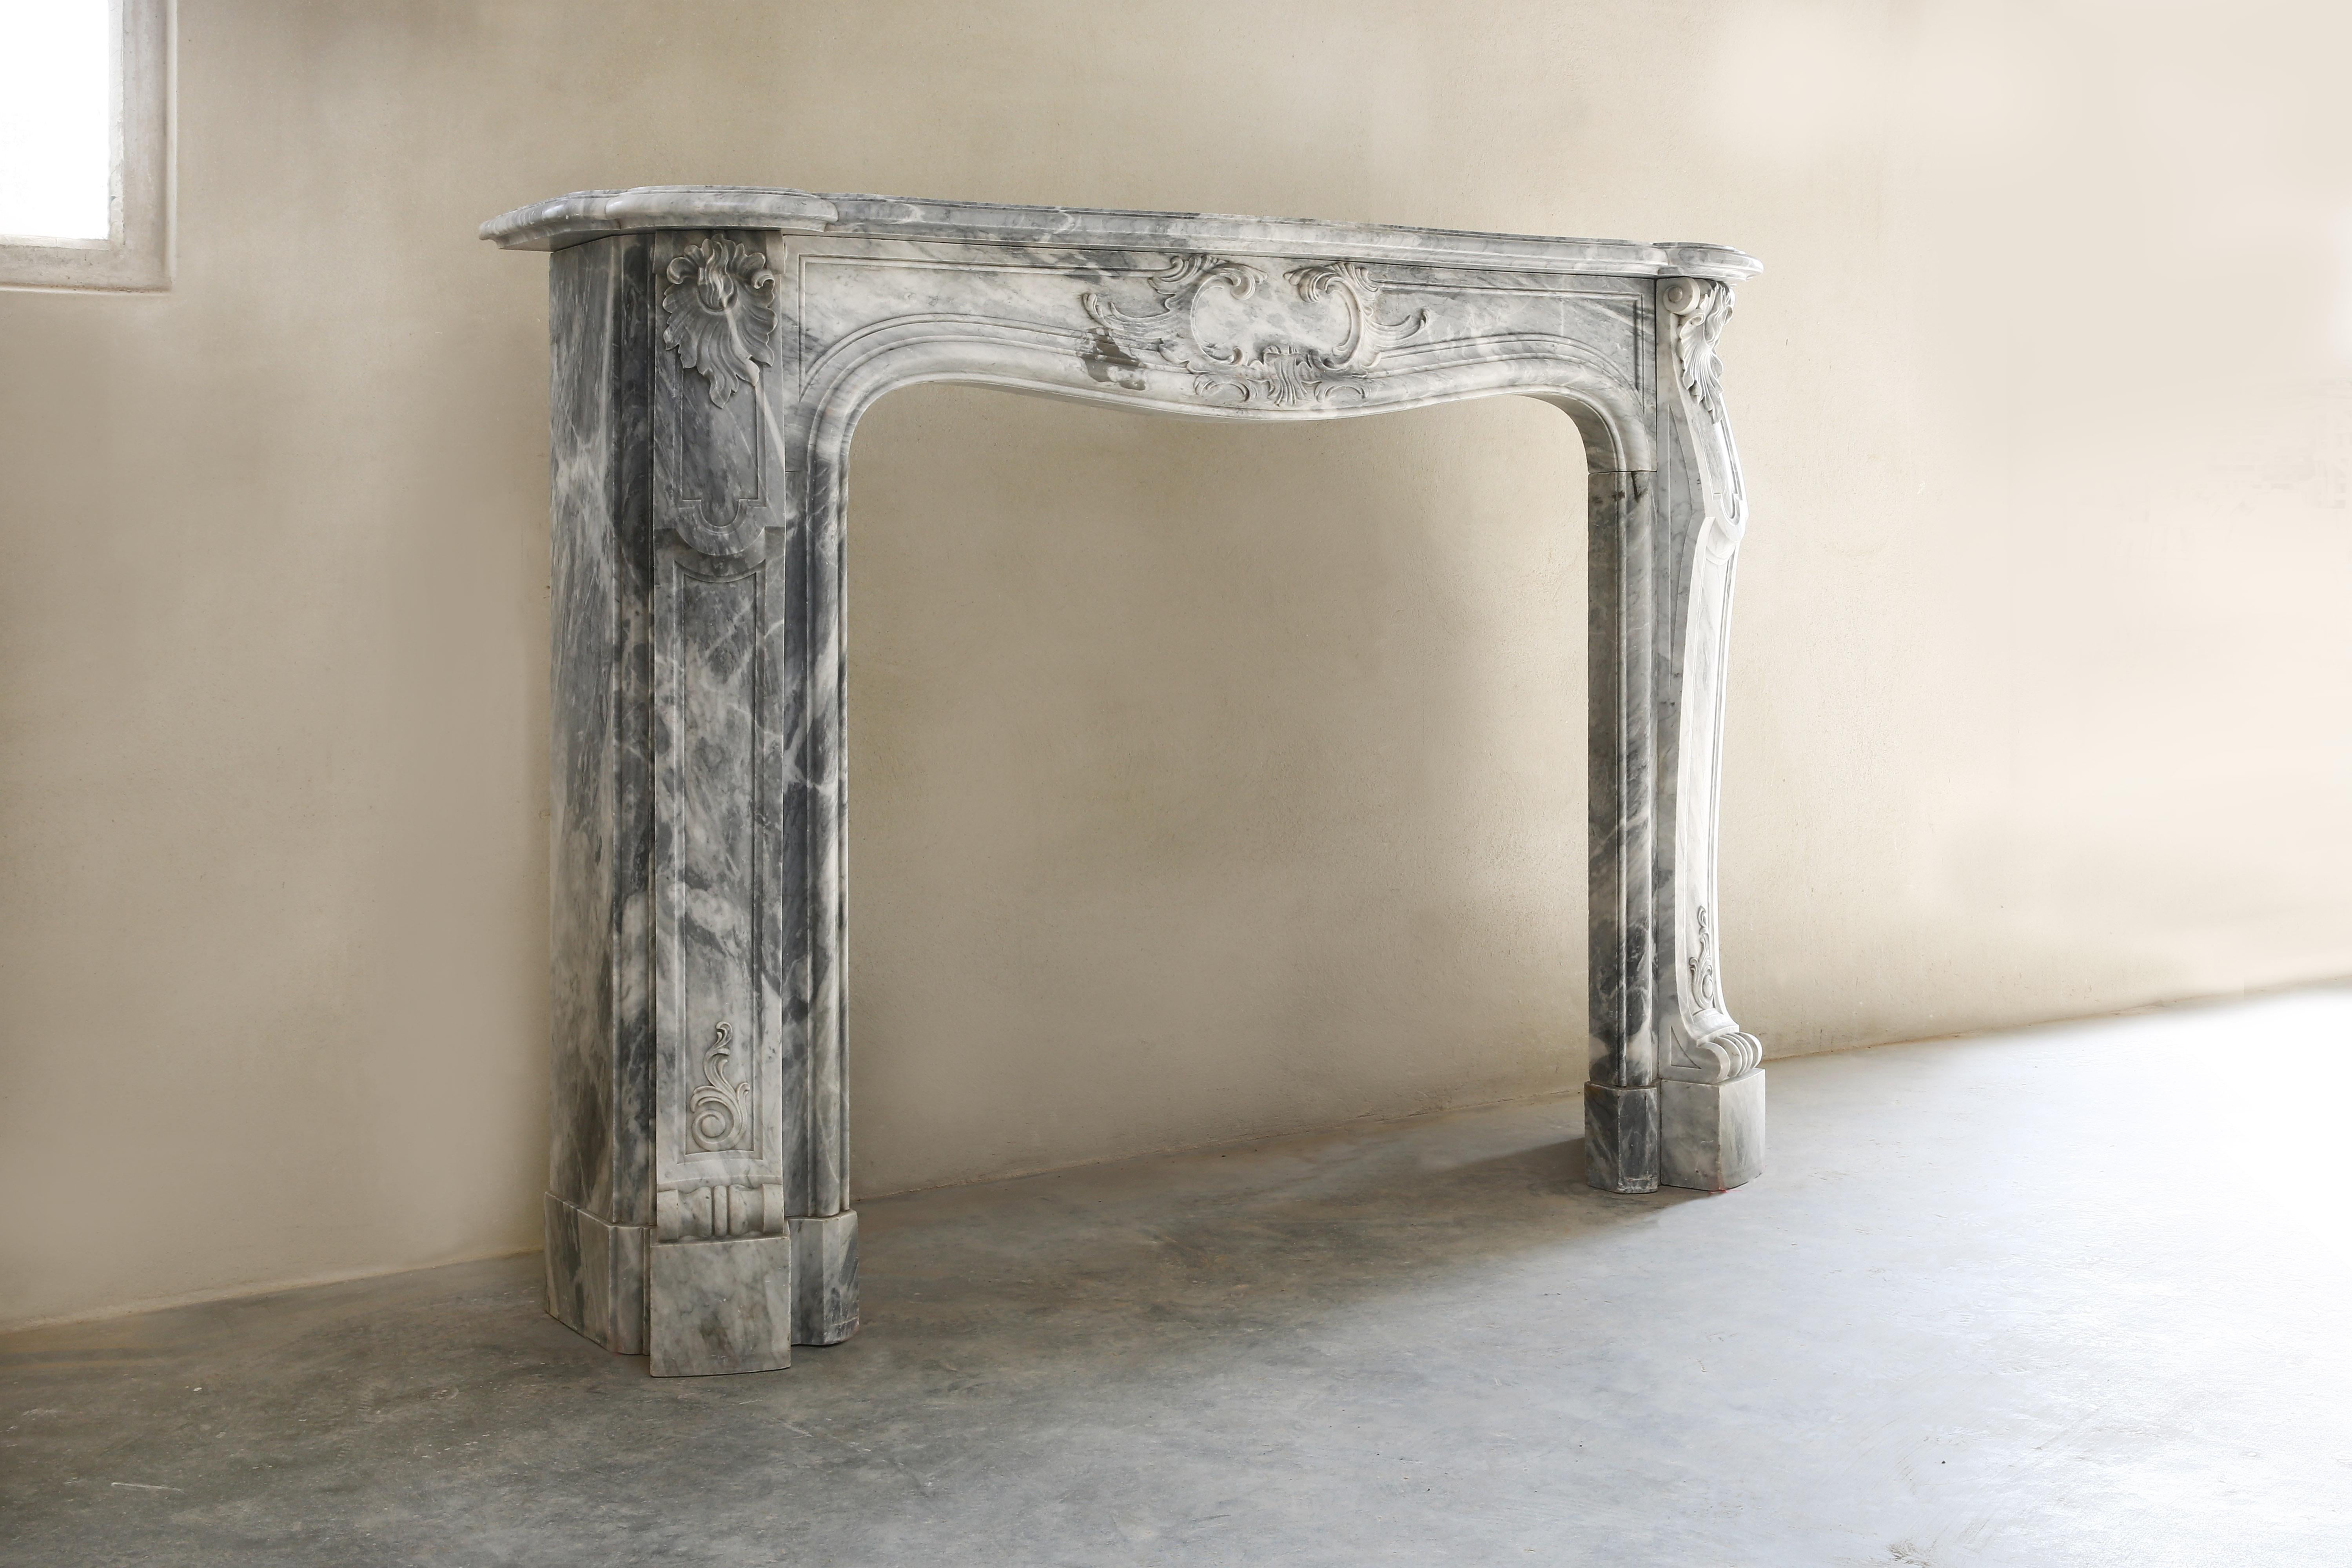 We have an exceptional antique marble mantelpiece in our collection! This antique marble fireplace dates from 1910 and is made of Blue Turquin marble. This is an exclusive marble type from Italy near Carrara, which is known for its many marble